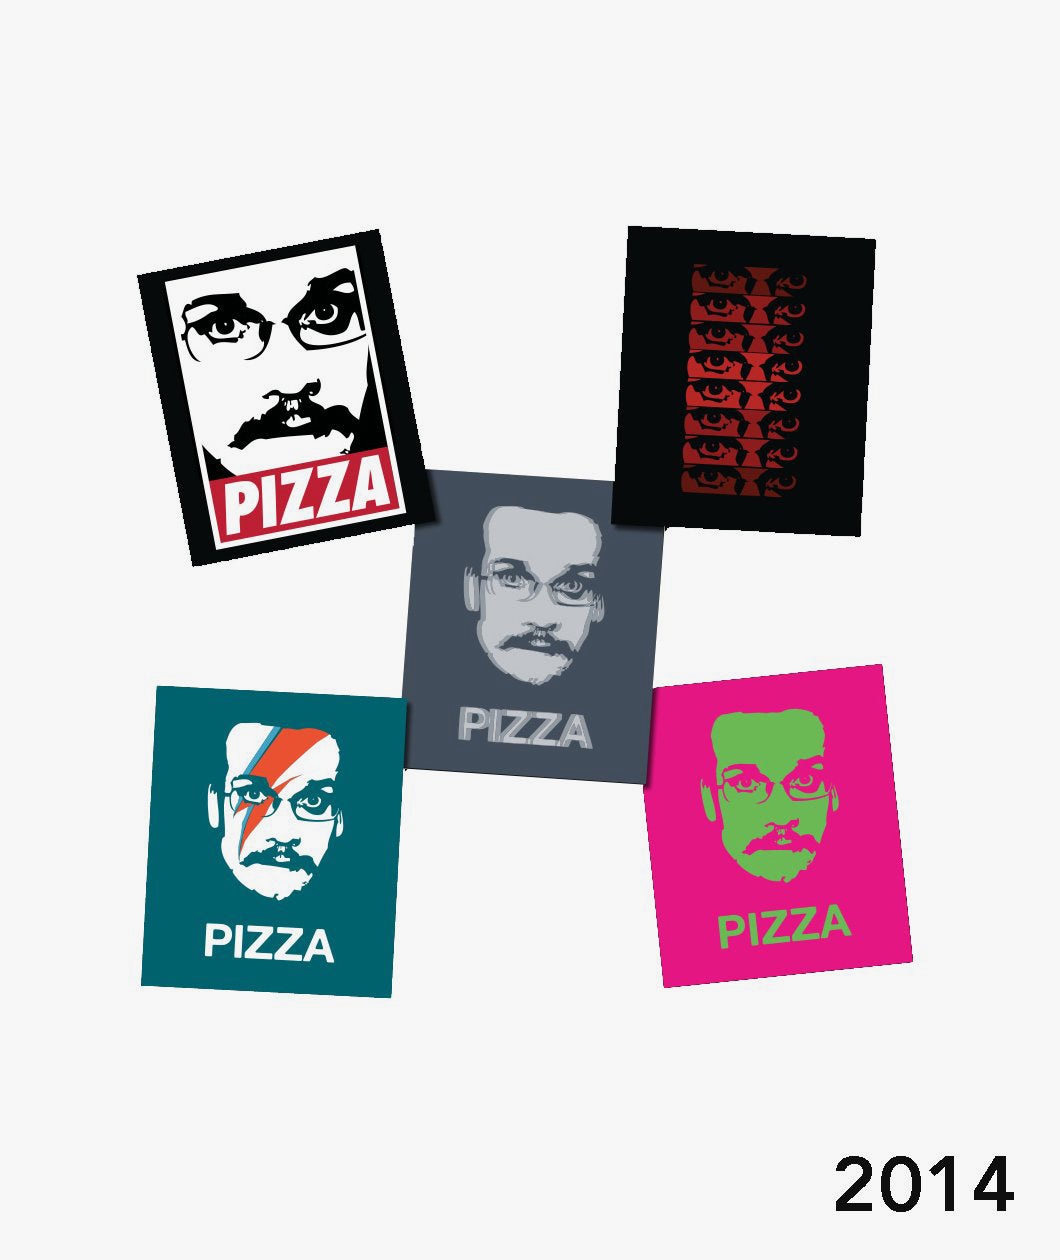 2014 Pizzamas Sticker pack featuring the 5 shirt designs from 2015. 